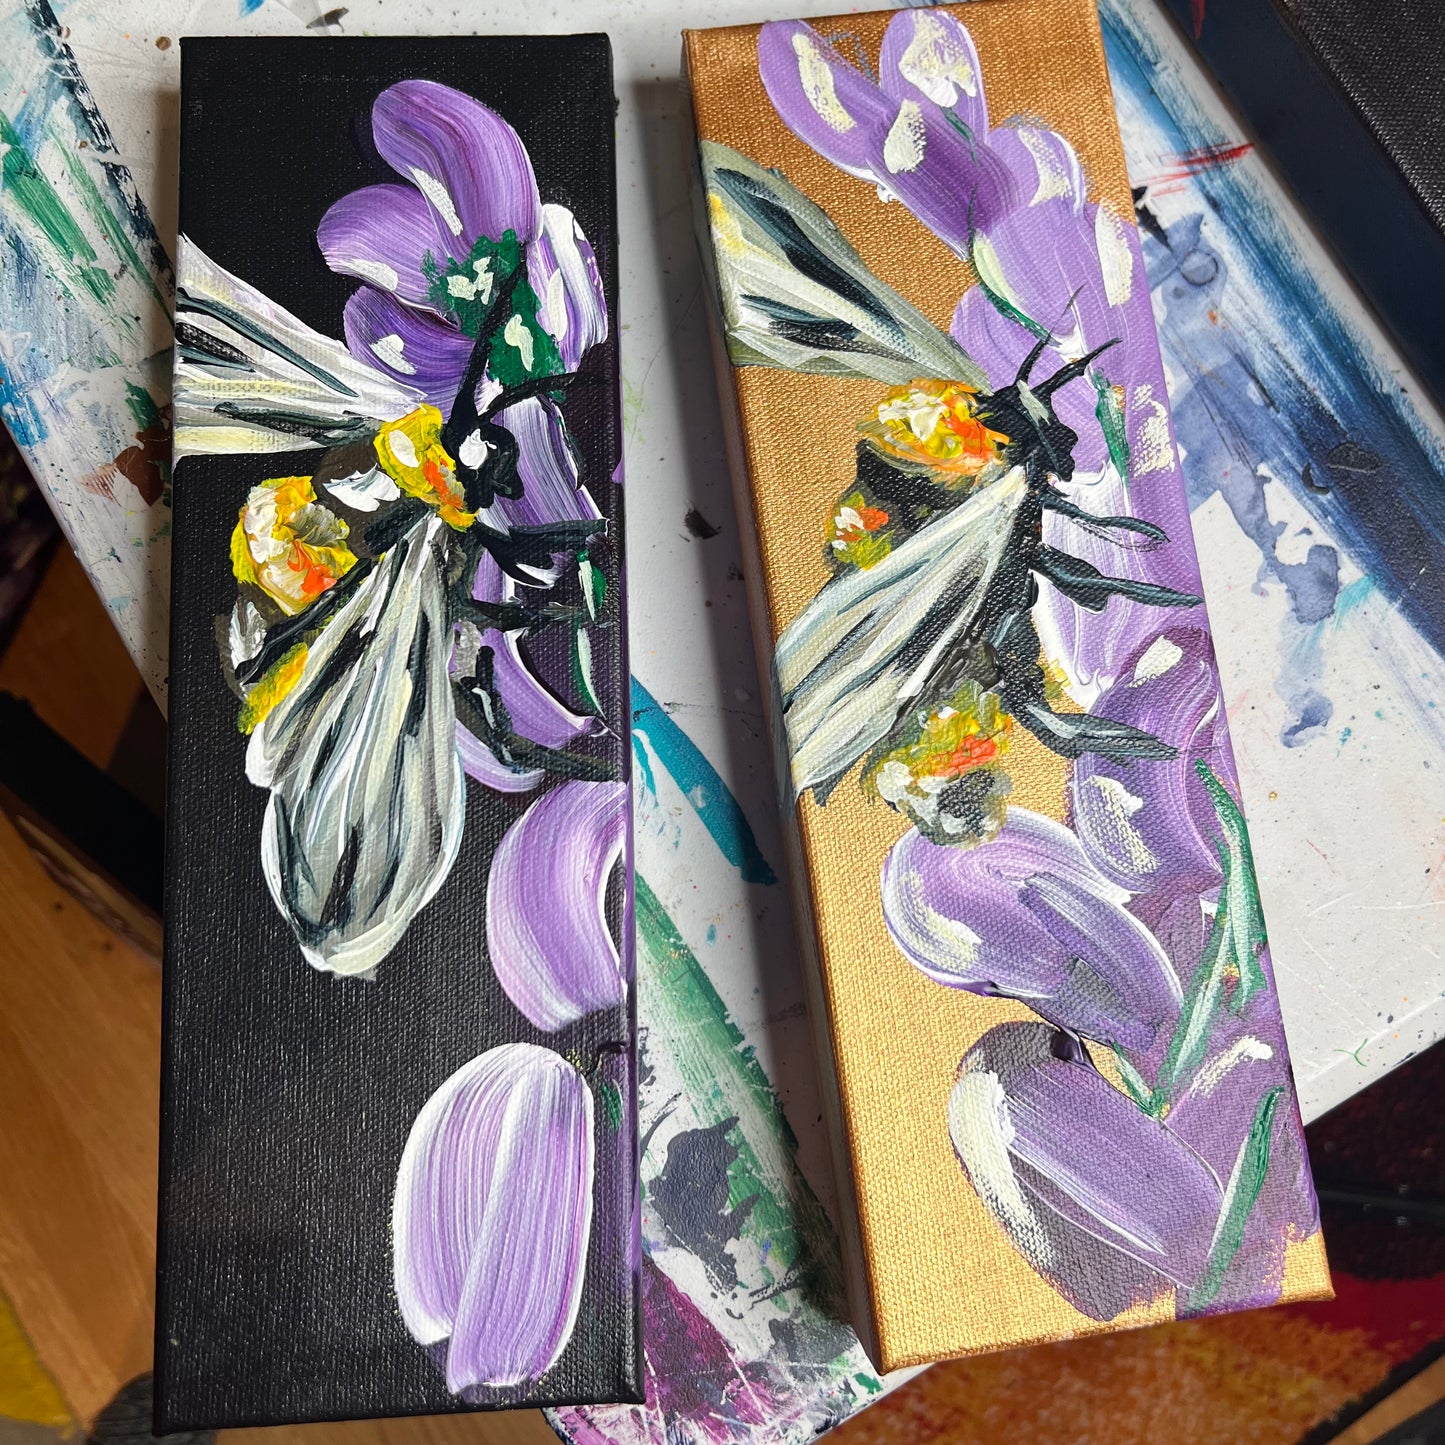 Small lavender bees